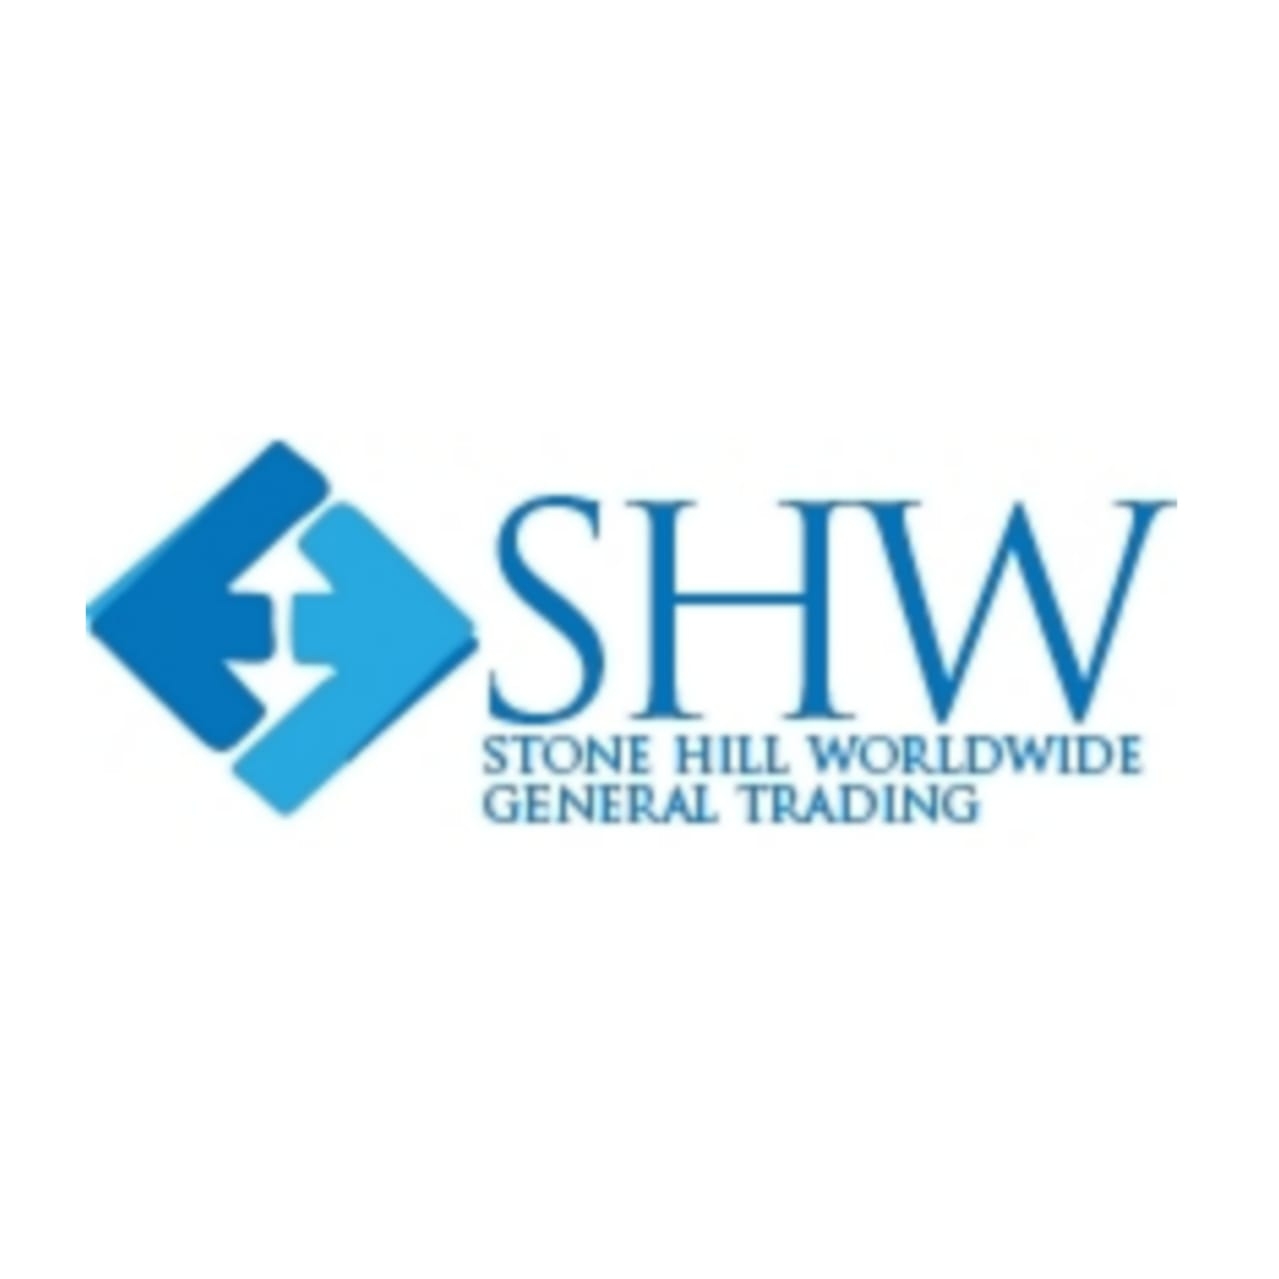 Stone Hill Worldwide General Trading